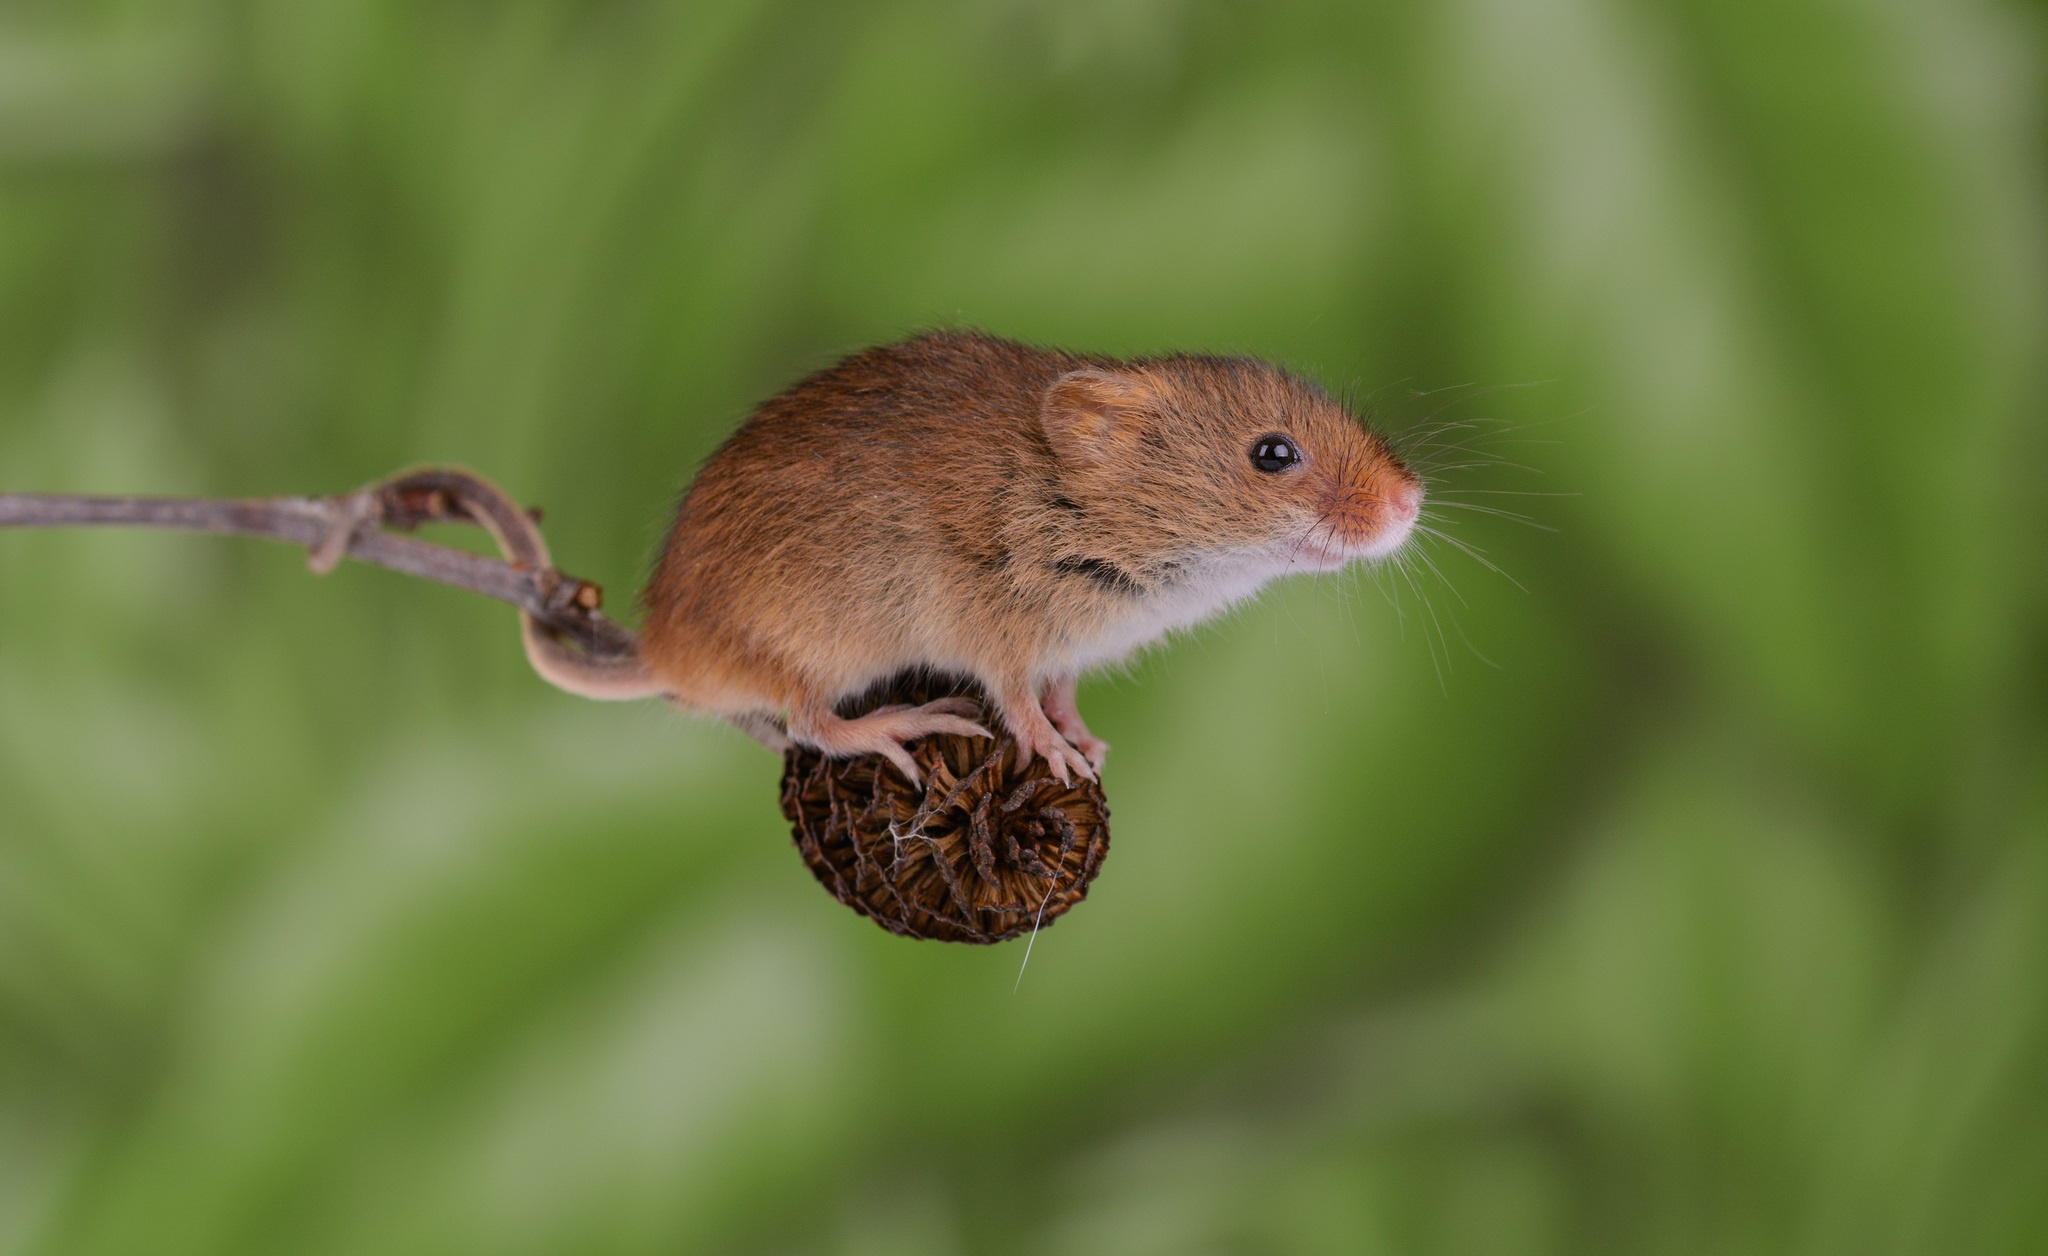  Mouse  HD Wallpaper  Background Image 2048x1256 ID 